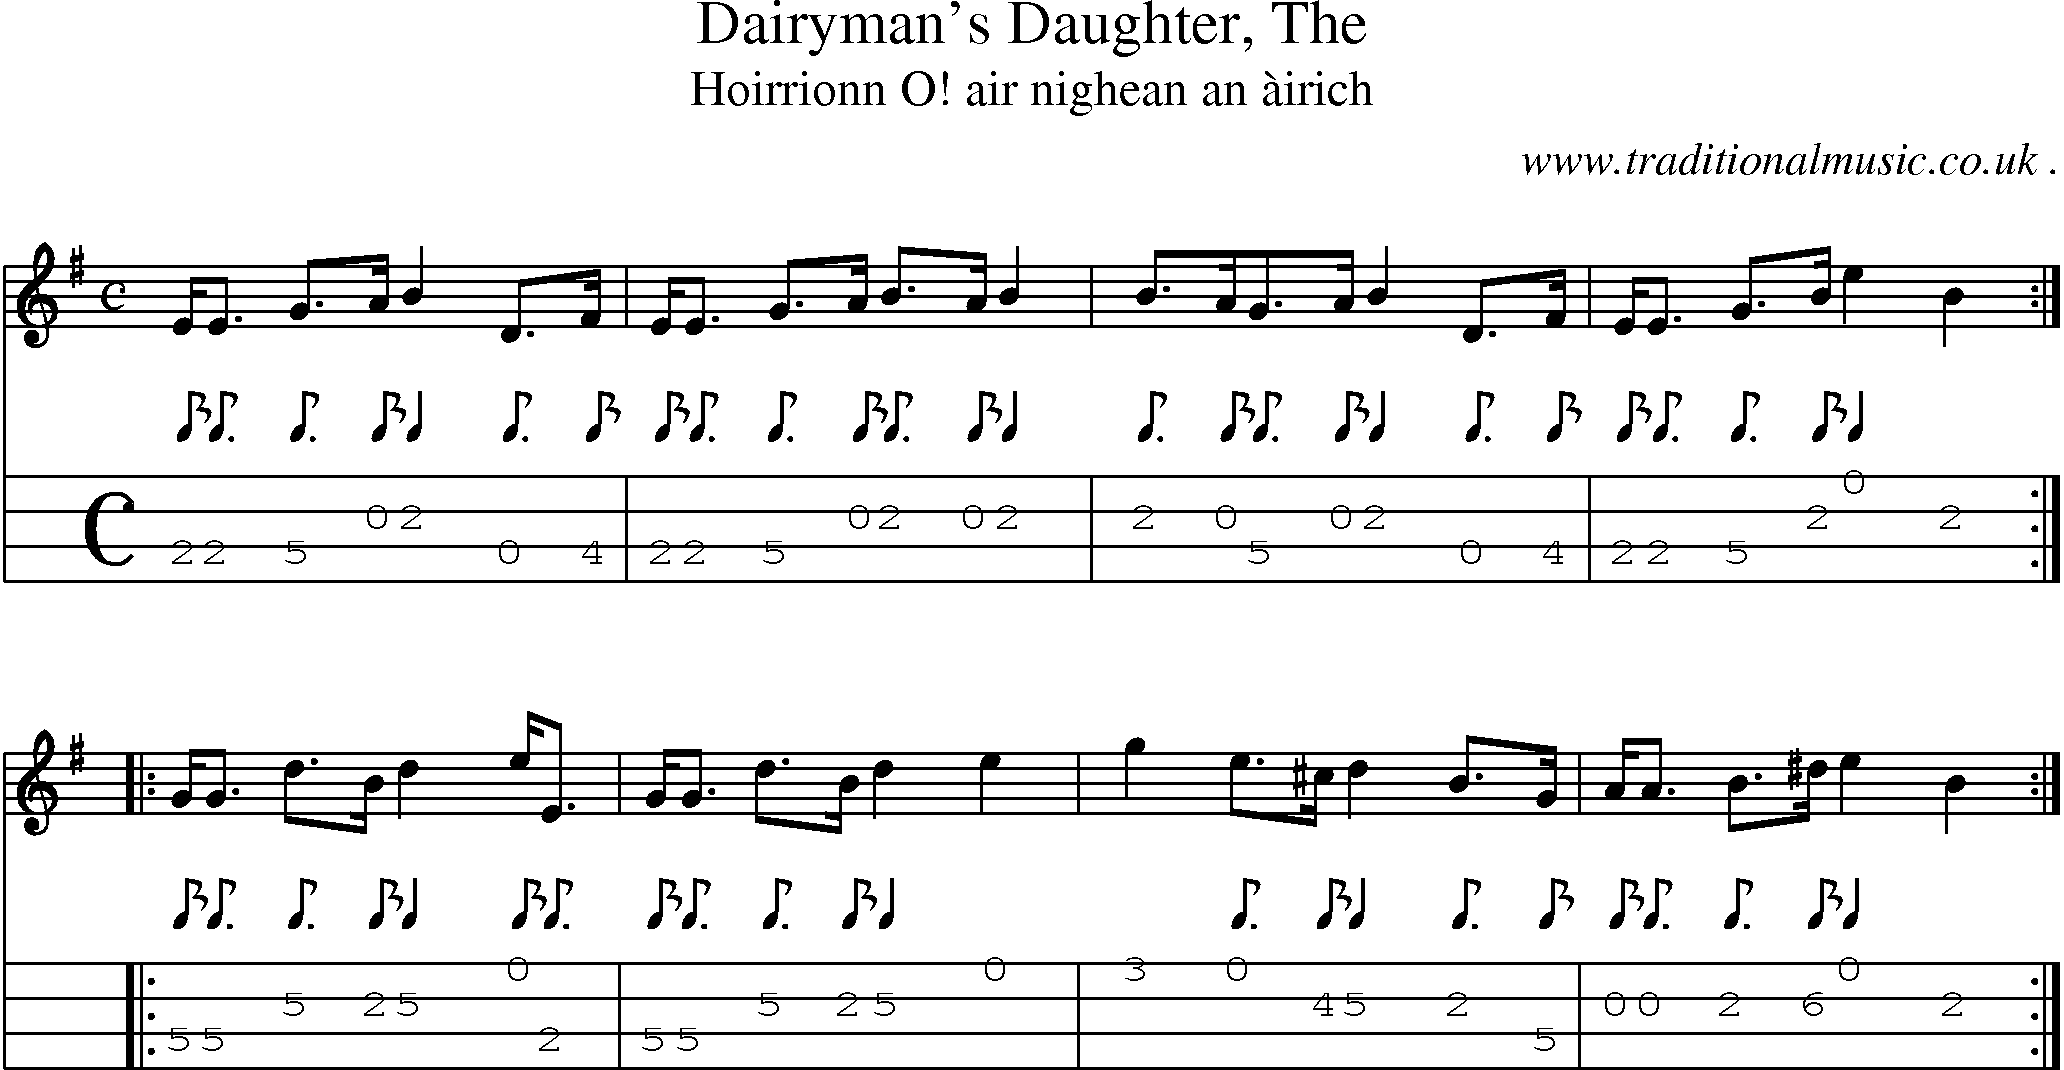 Sheet-music  score, Chords and Mandolin Tabs for Dairymans Daughter The